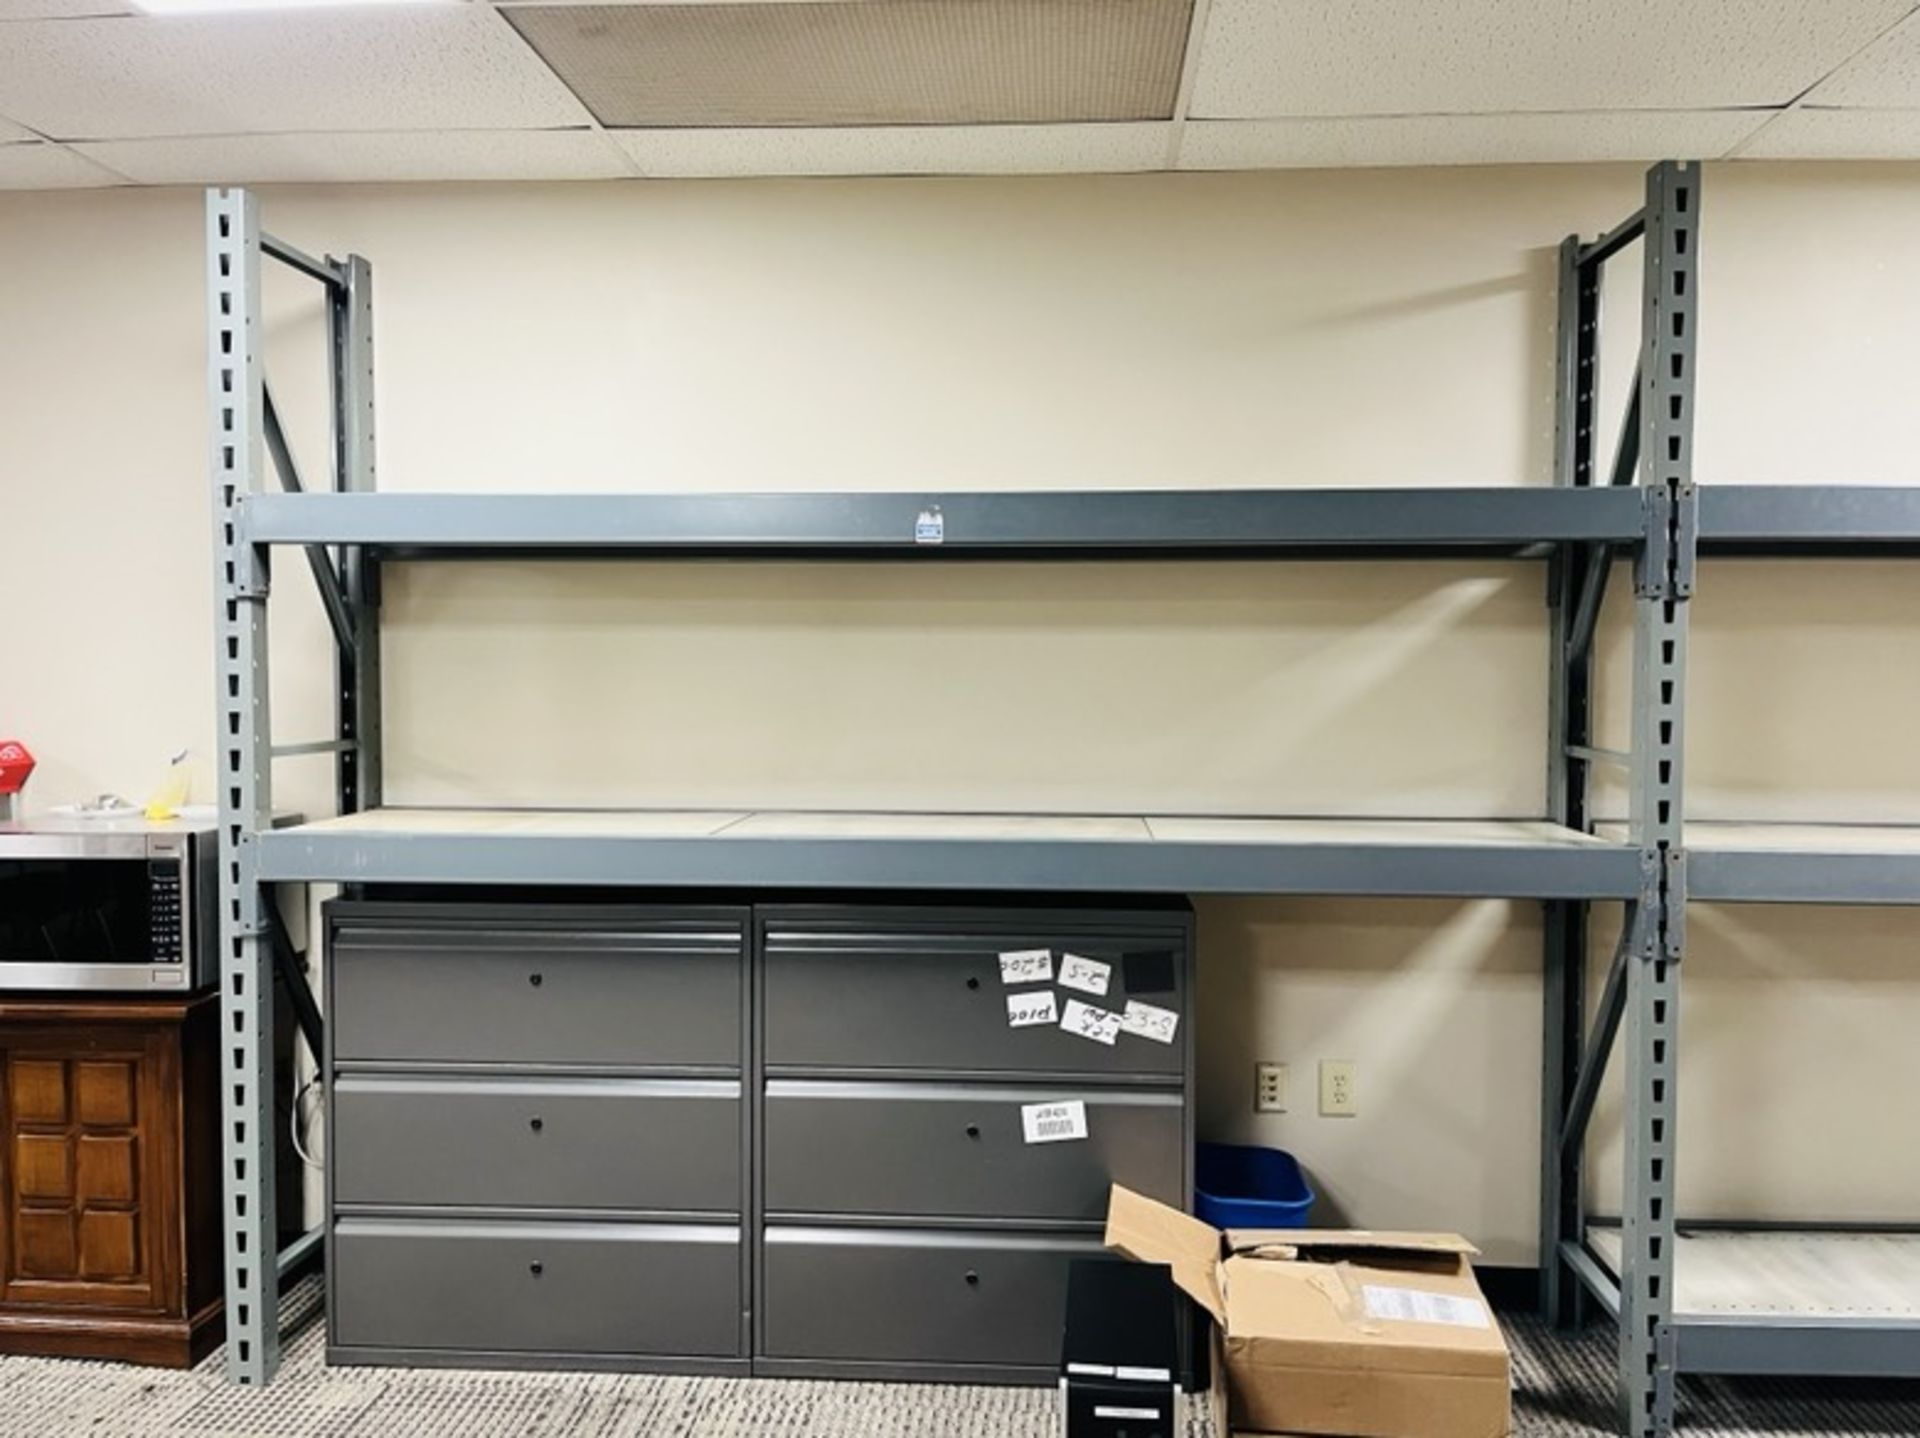 5 SECTION OF RETAIL/MERCHANDISE PALLET RACK SHELVING 6'H X 21.5"D X 108"L WITH 3 SHELVES - Image 2 of 4